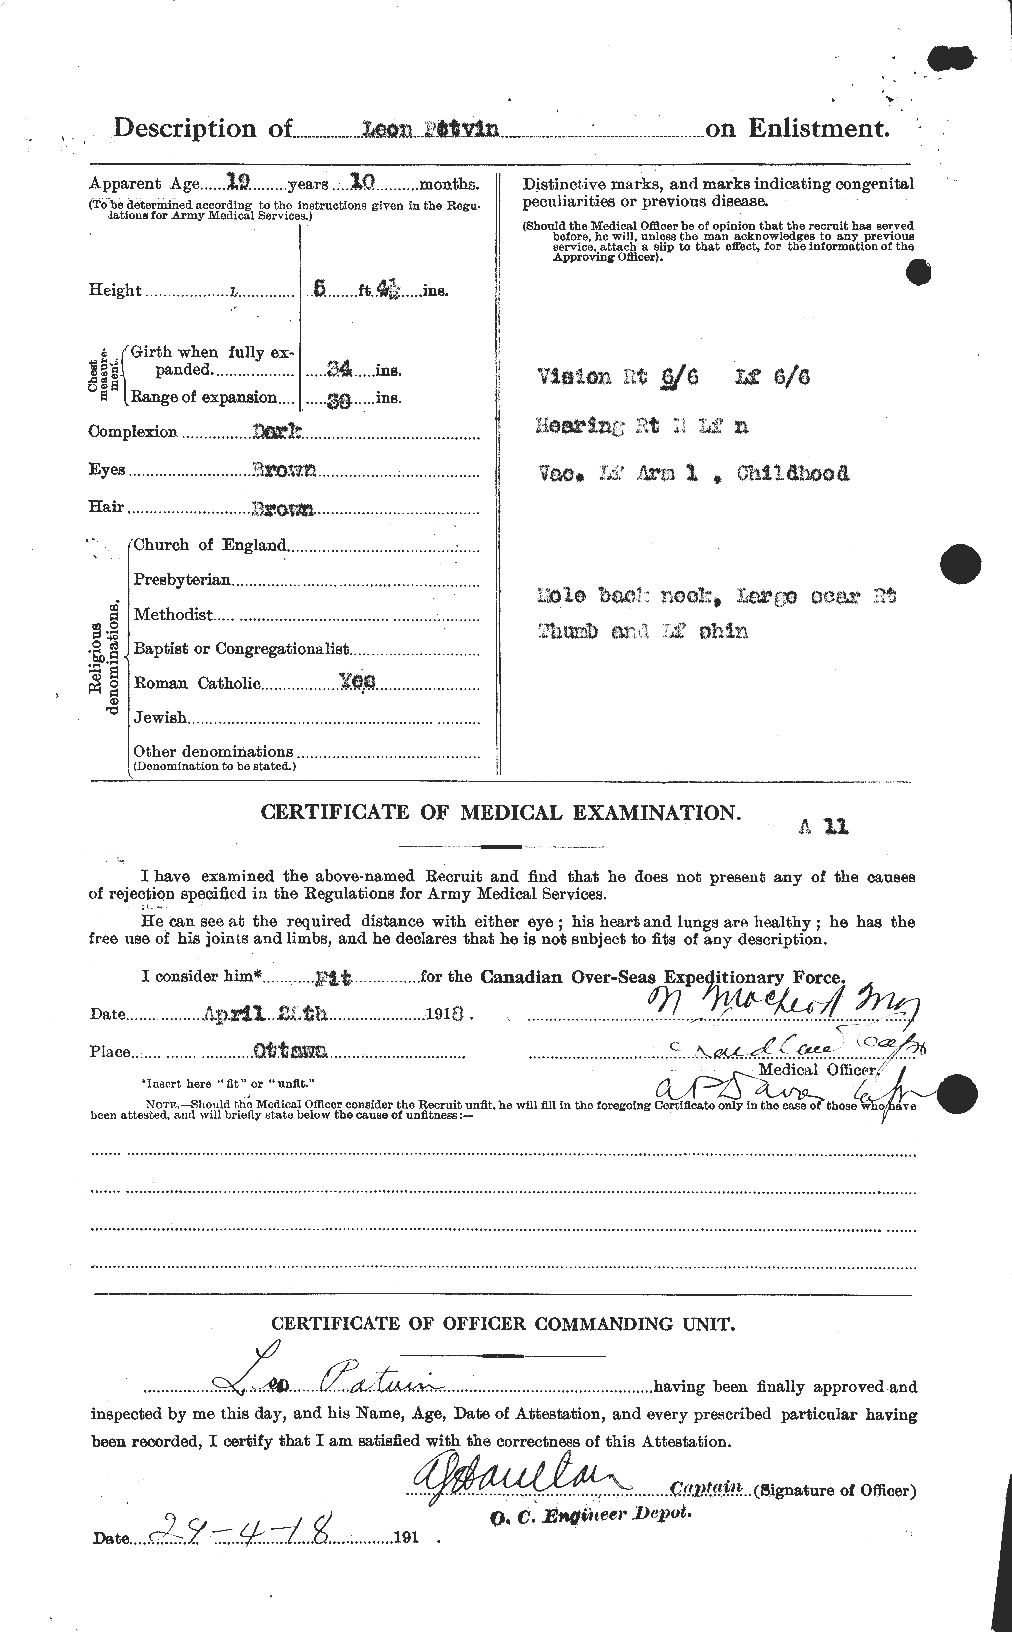 Personnel Records of the First World War - CEF 584649b